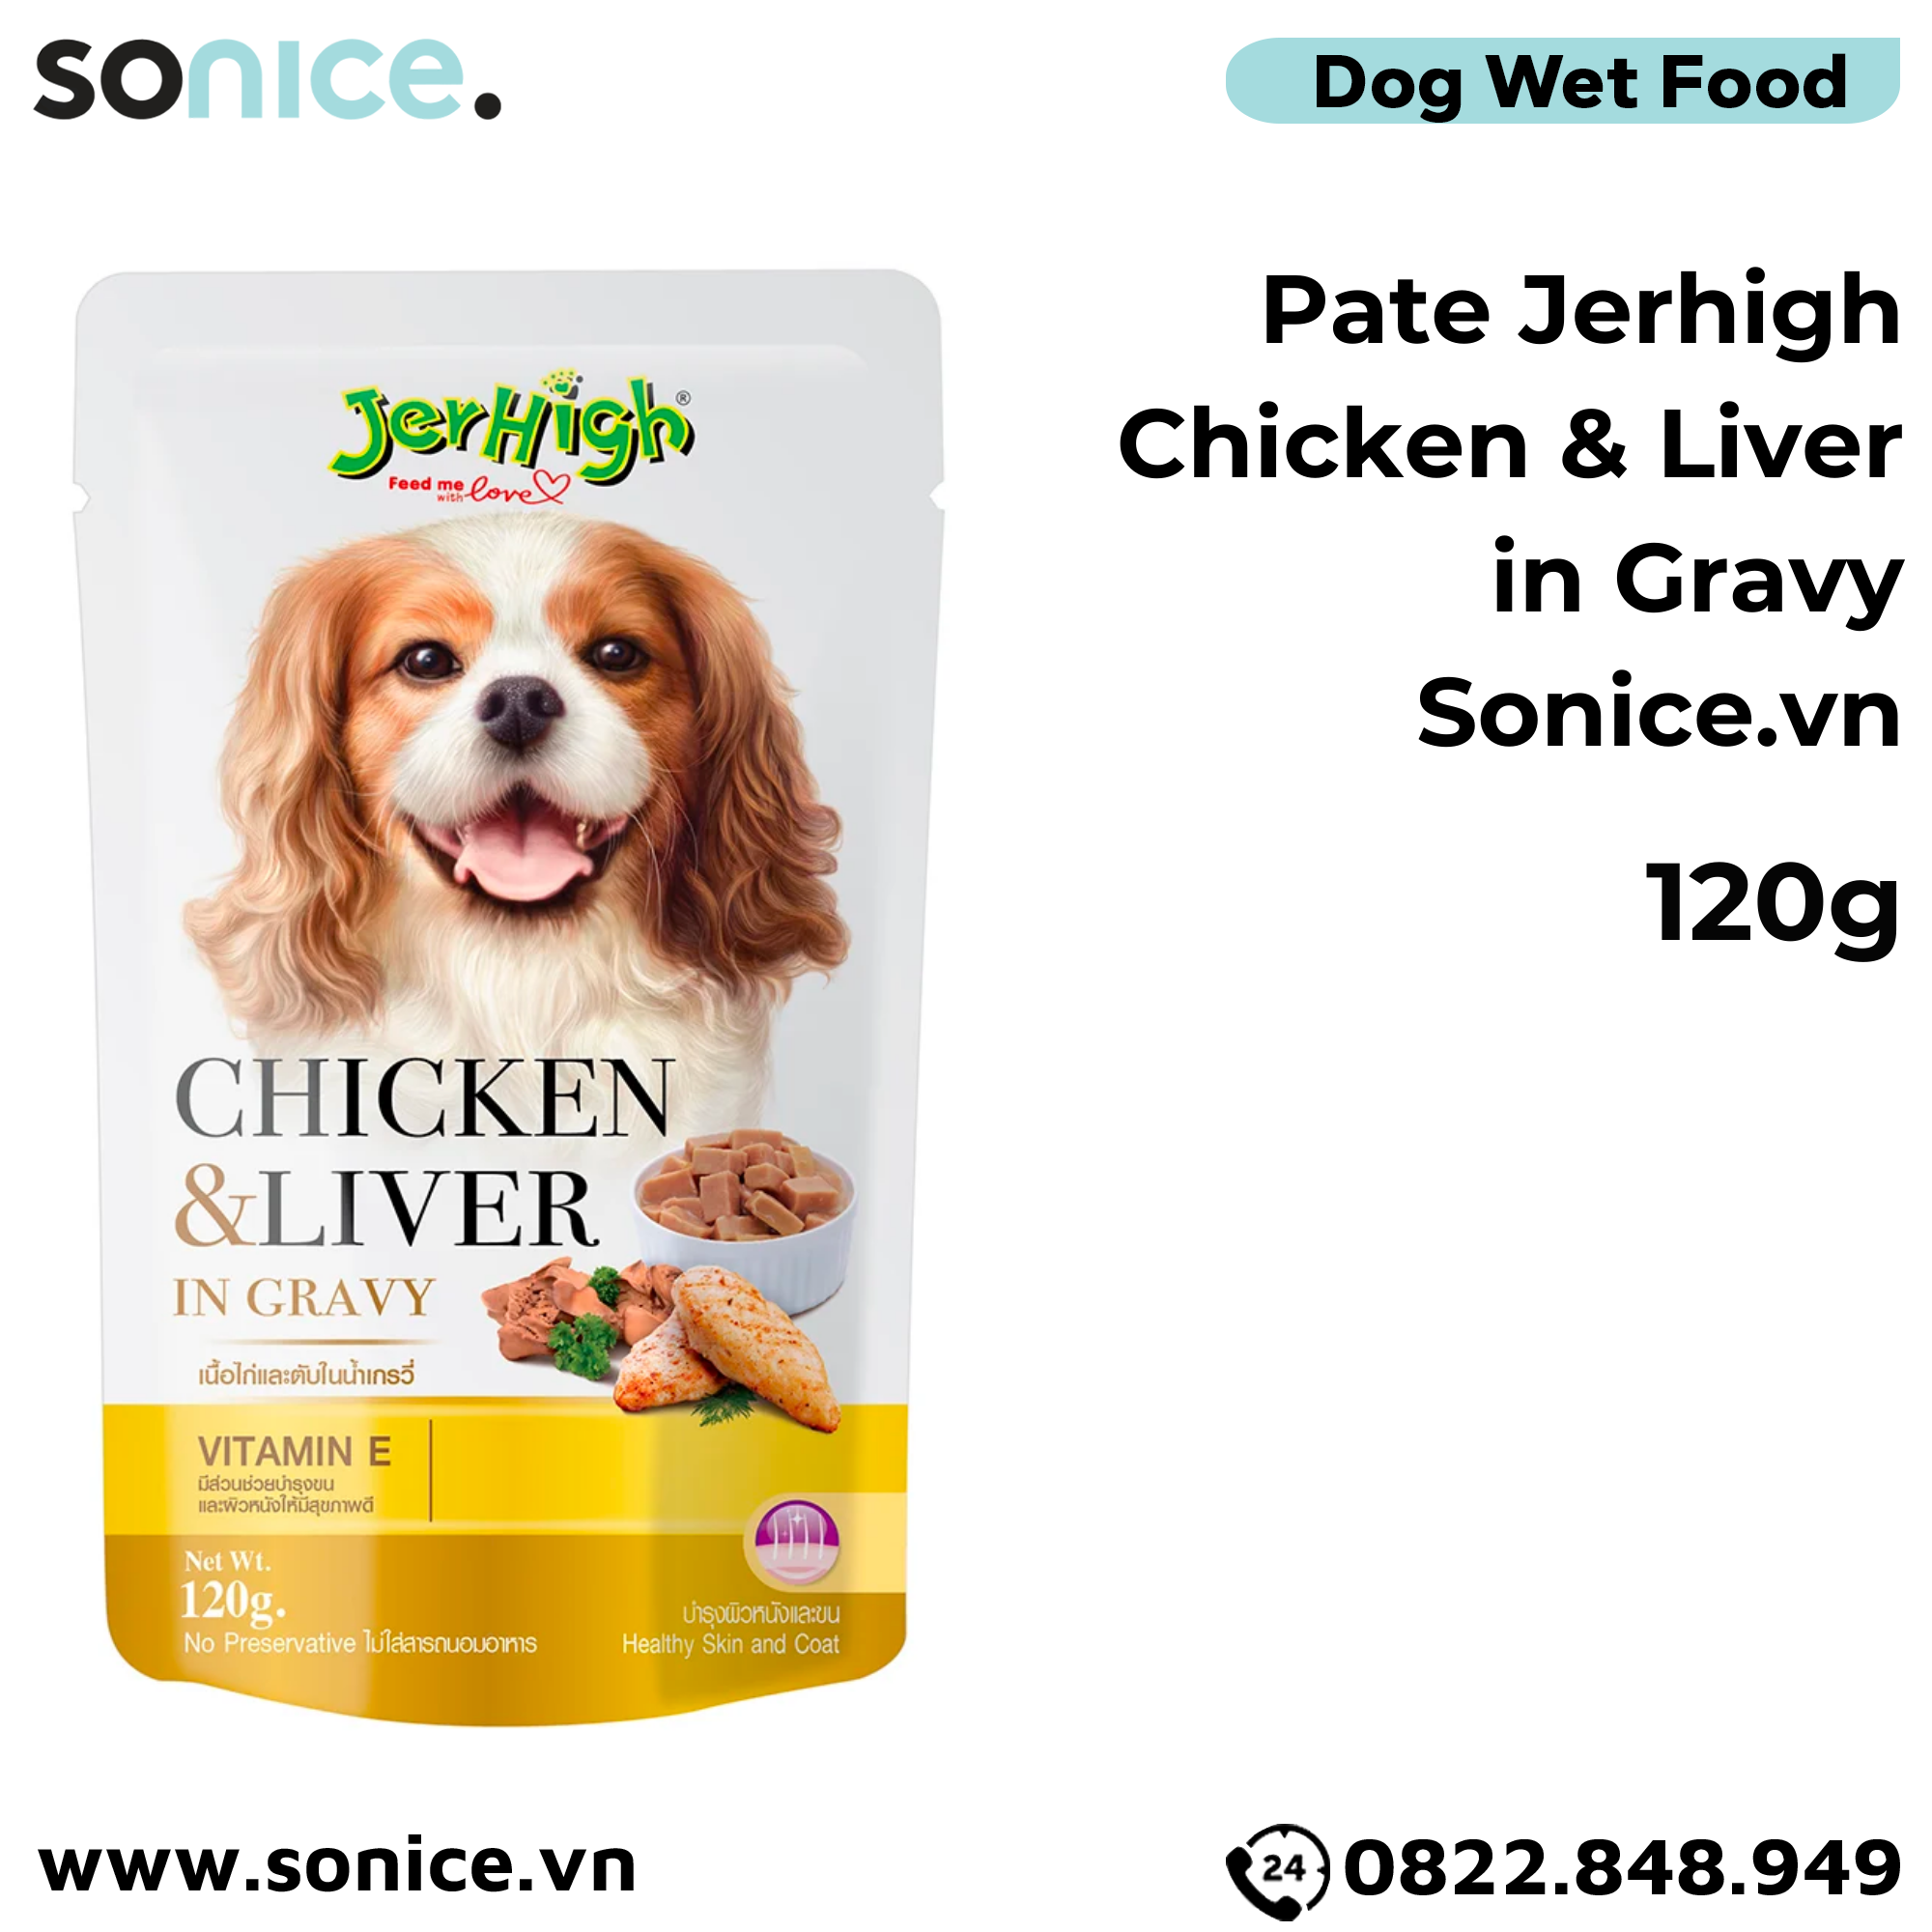  Combo Pate Jerhigh Chicken, Duck, Beef, Liver & Vegetable in Gravy 120g - mix vị 24 gói SONICE. 